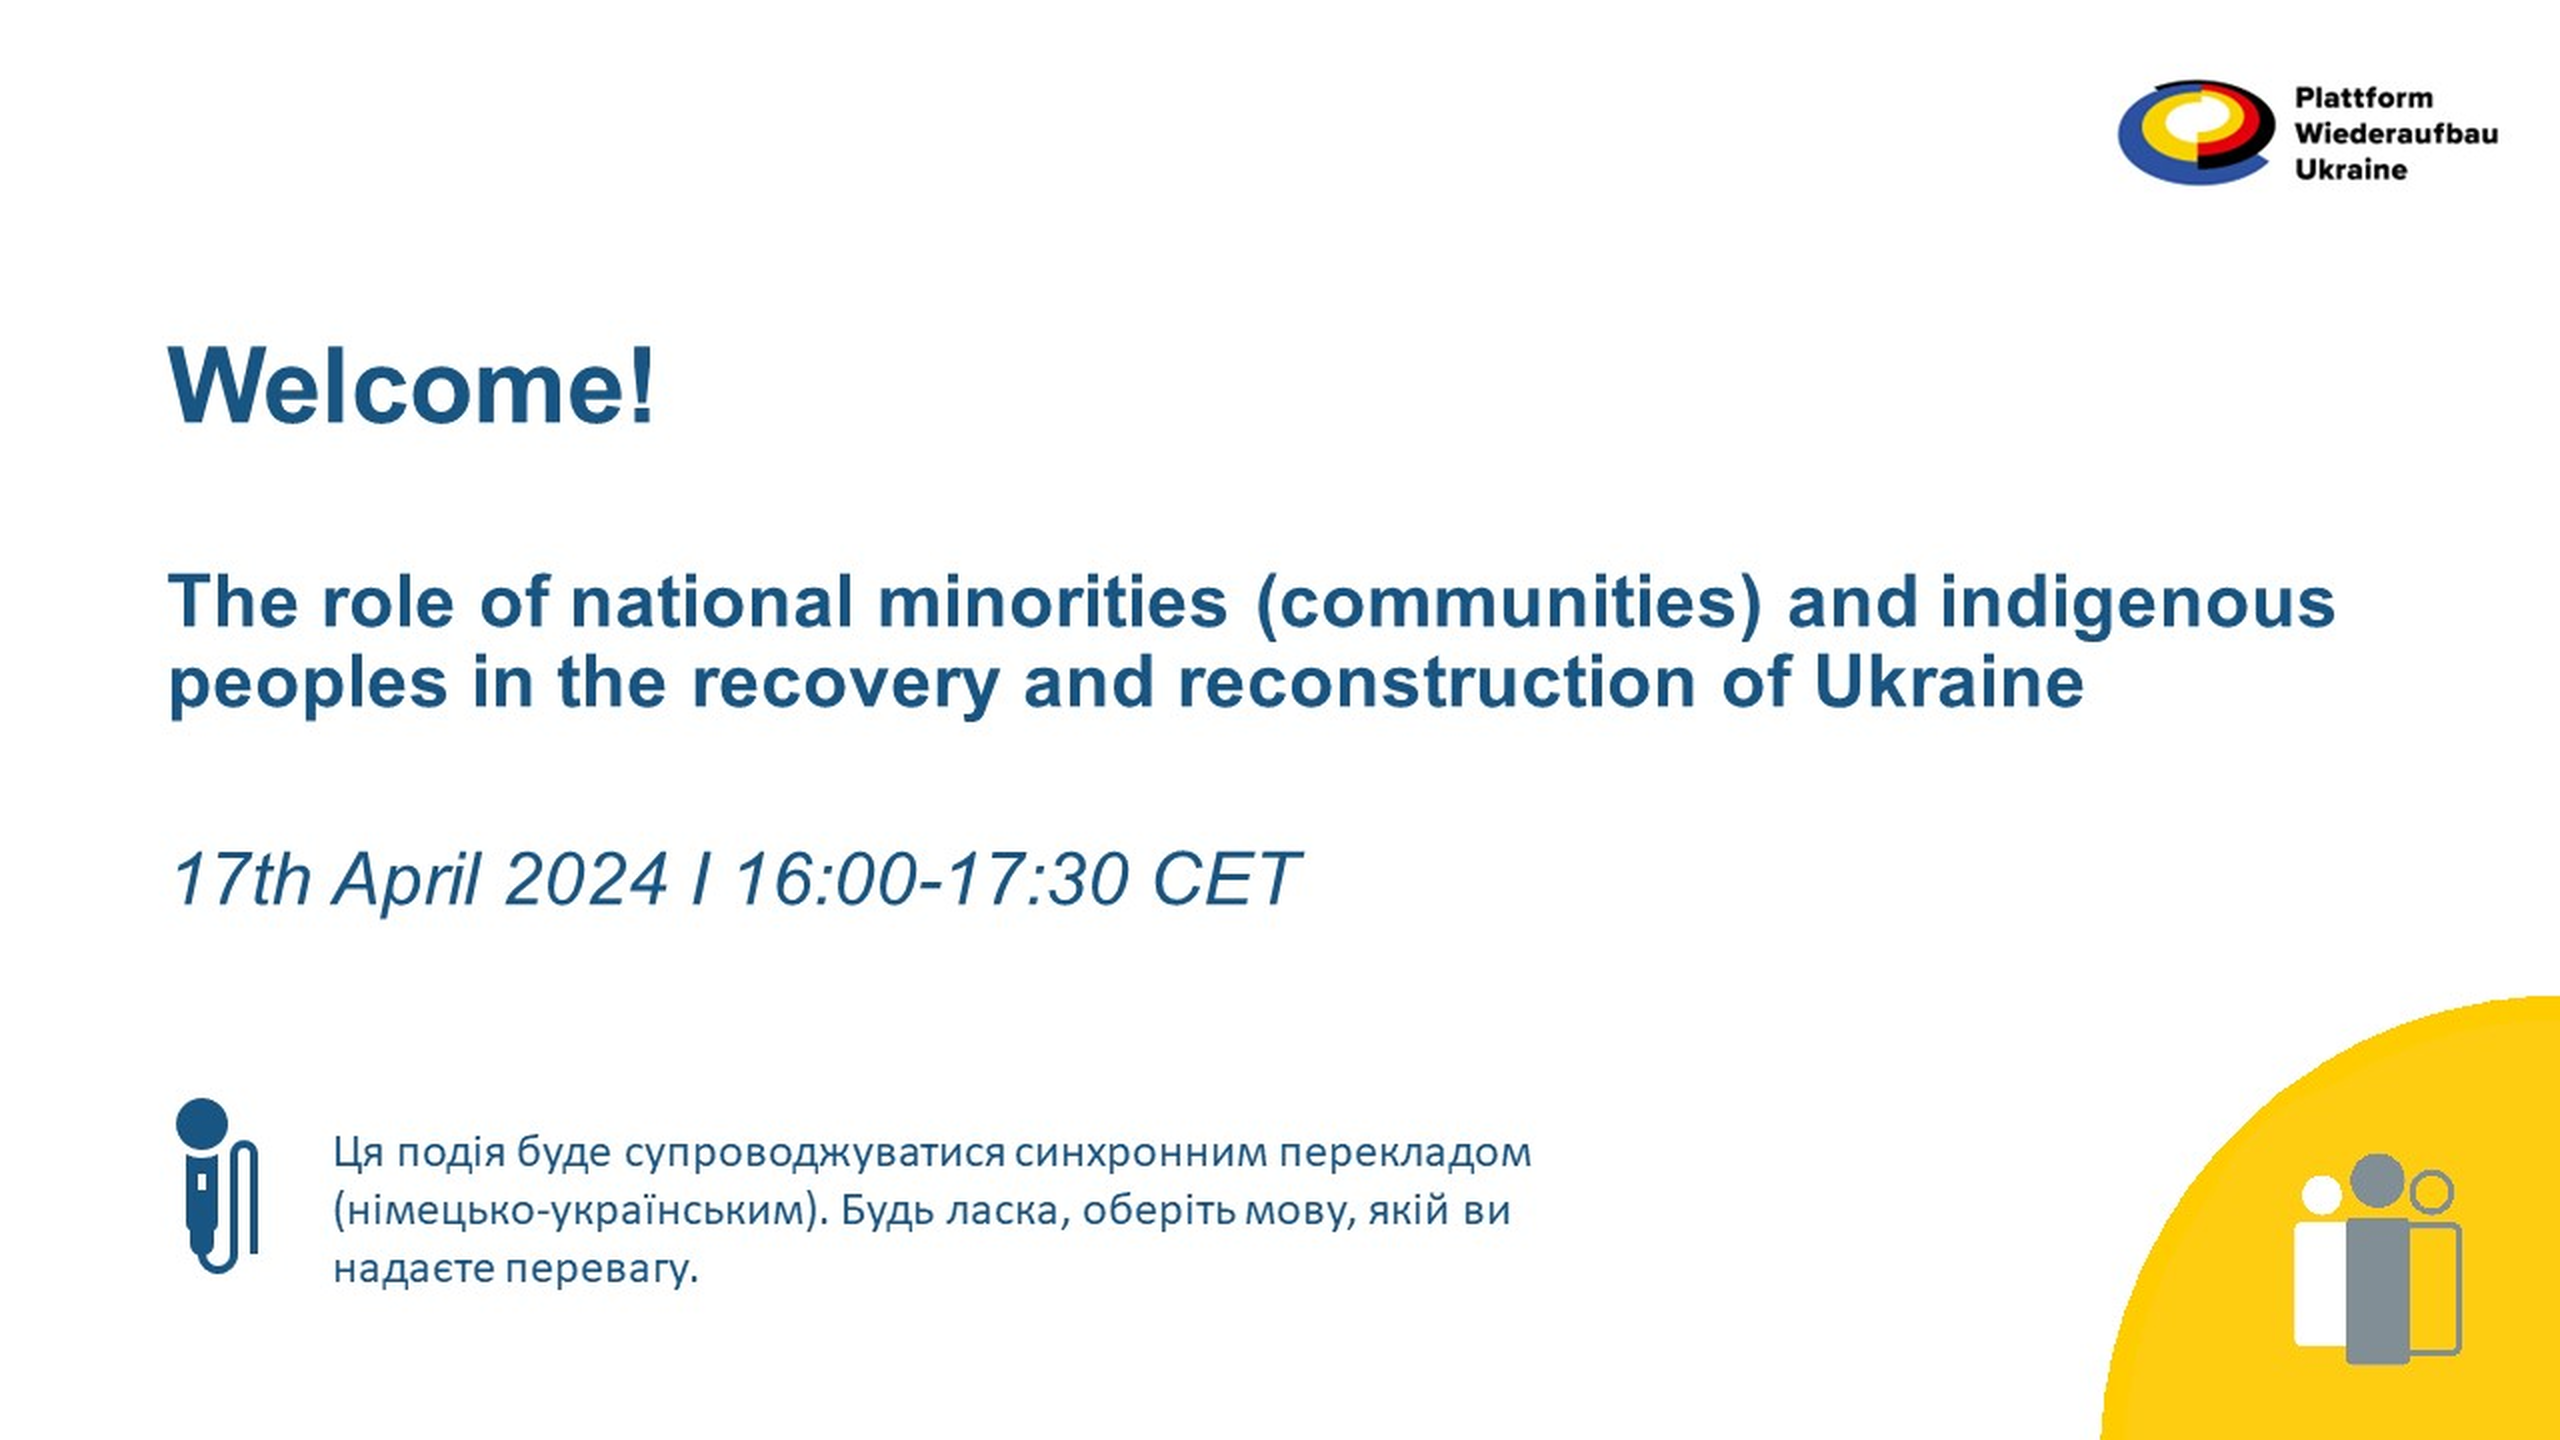 Videovorschaubild "The role of national minorities and indigenous peoples in the recovery and reconstruction of Ukraine "